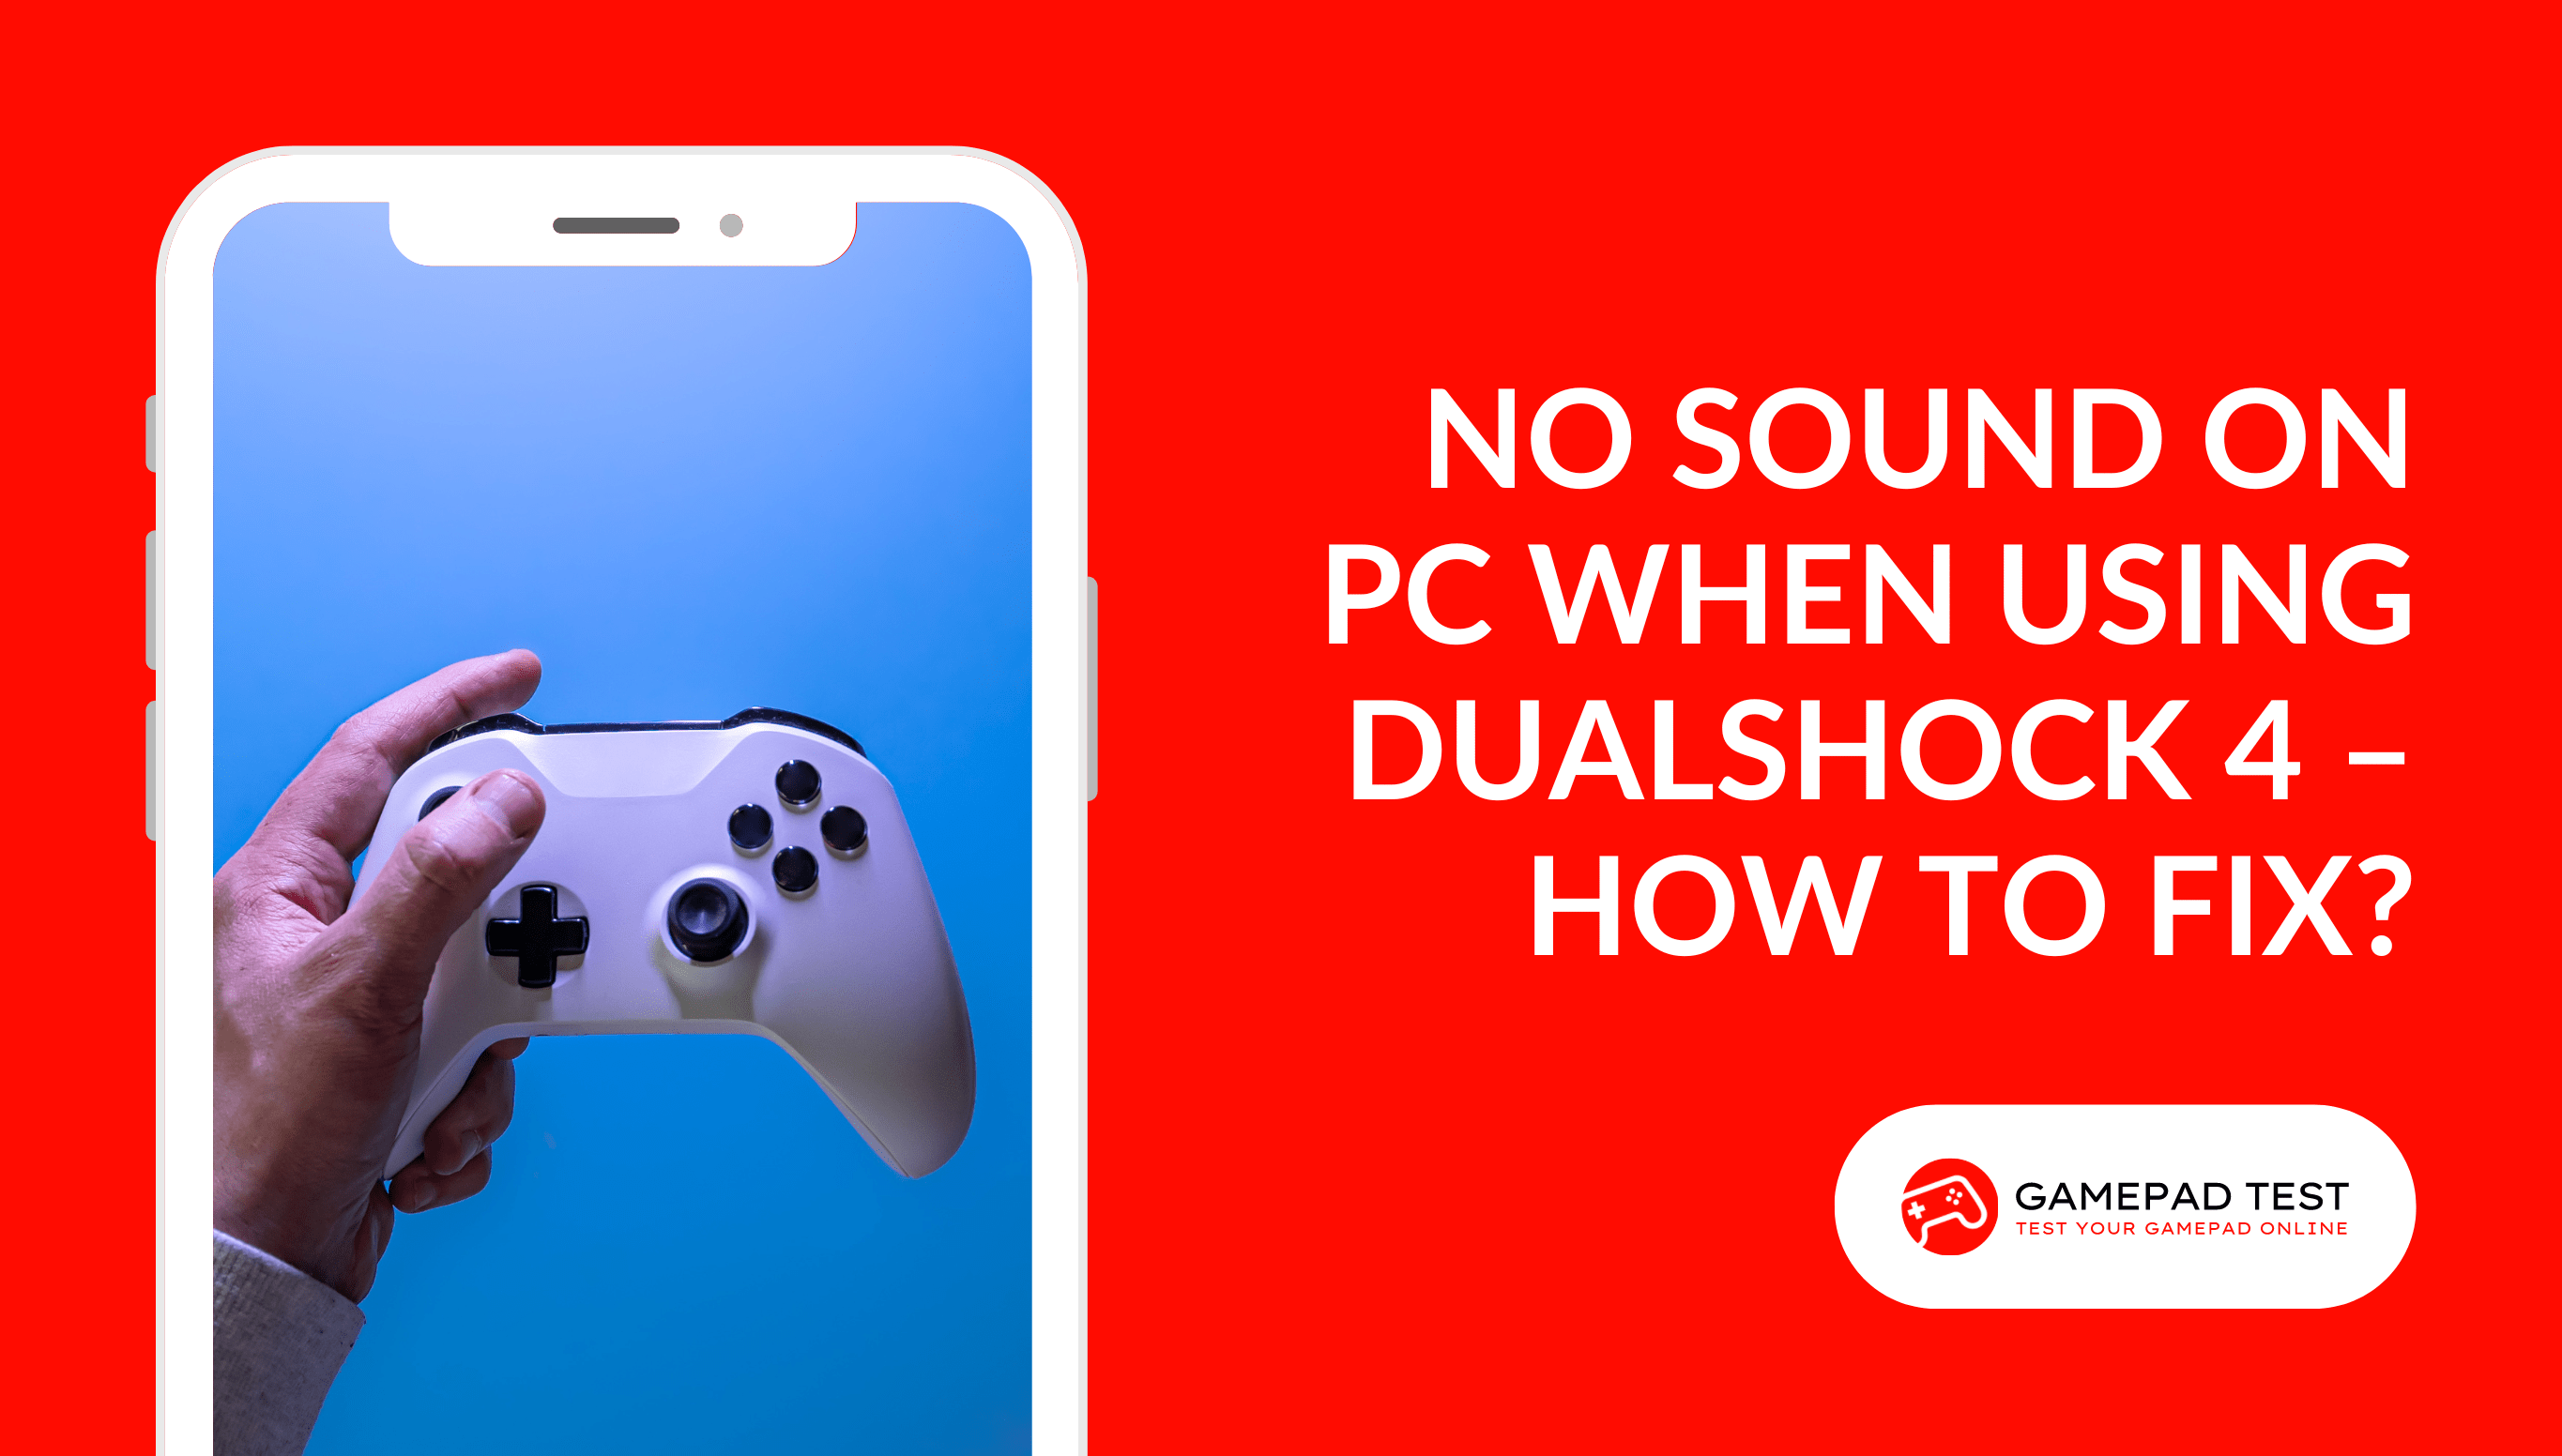 No Sound on PC When Using DualShock 4 – How to Fix - Blog Featured Image - gamepadtest.com